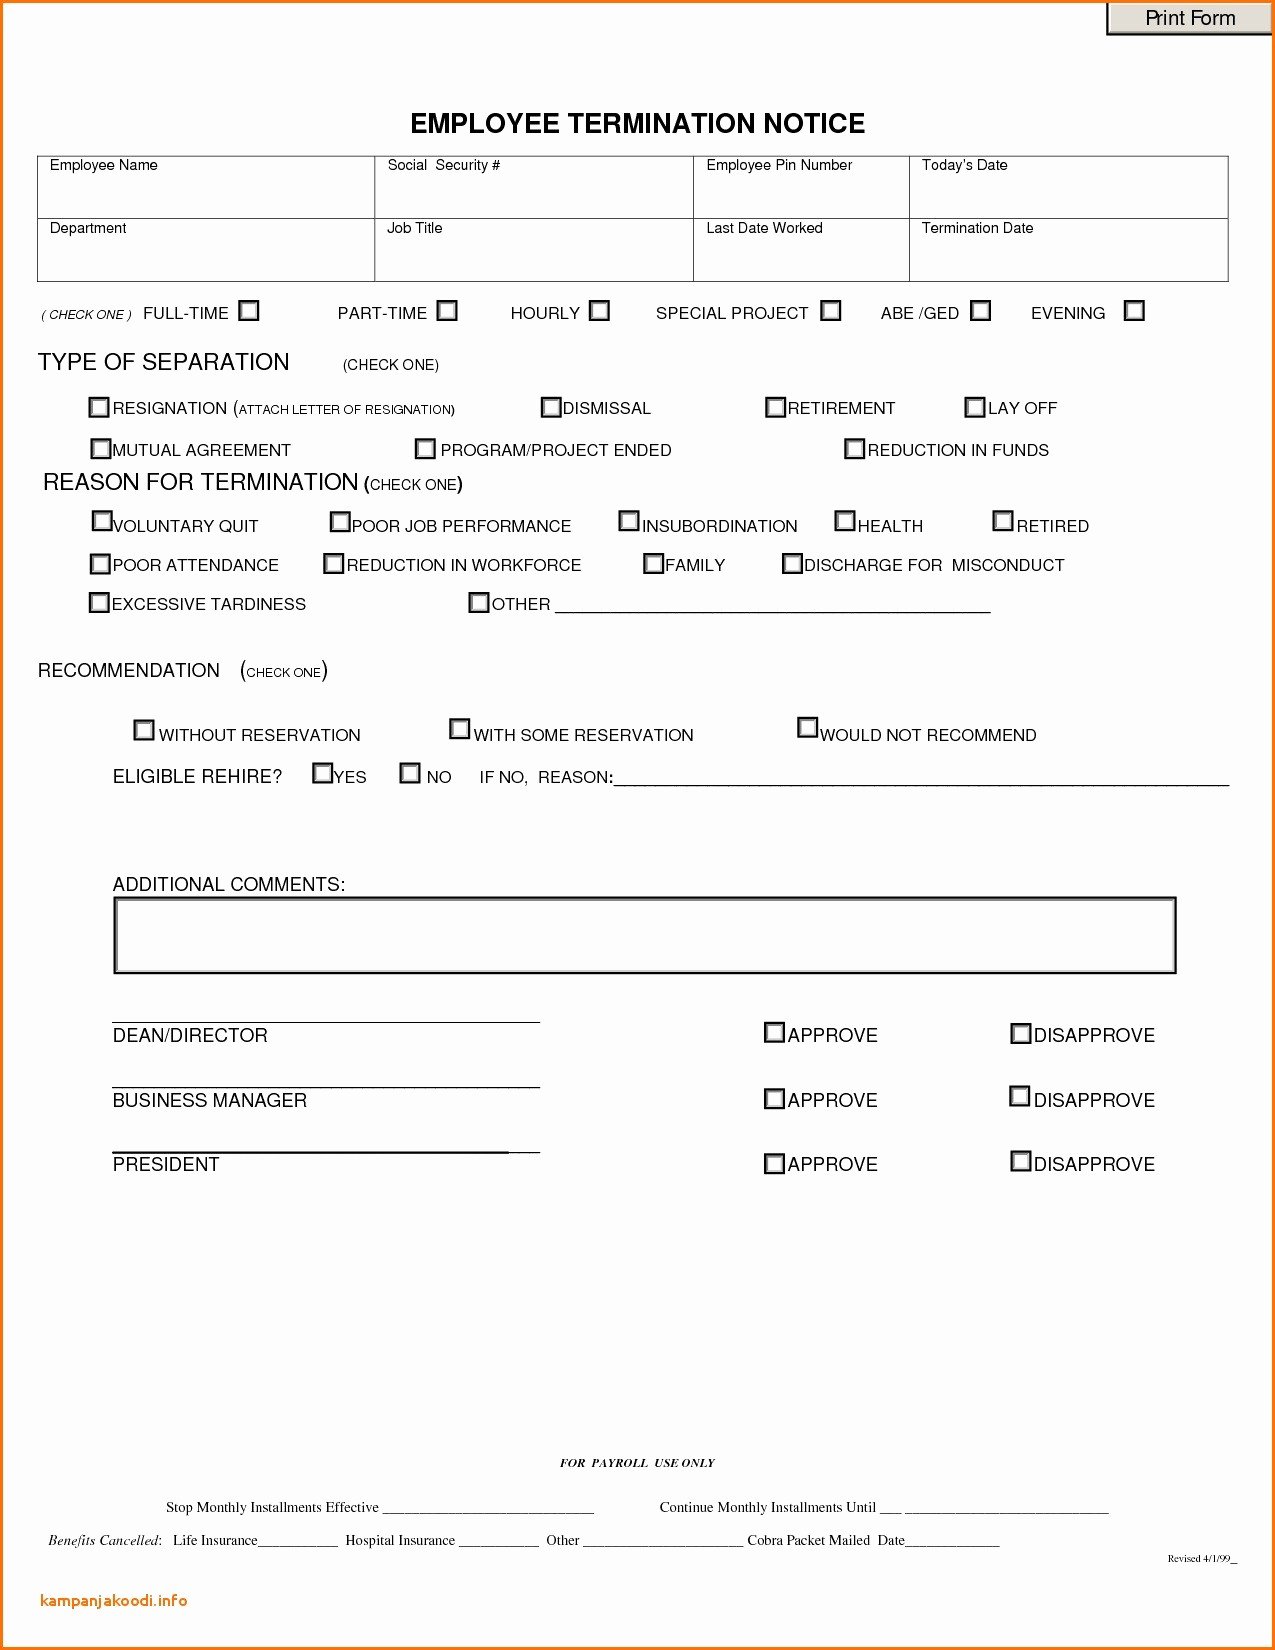 Employment Termination form Template Best Of Free Termination form Picture – Printable Sample Letter